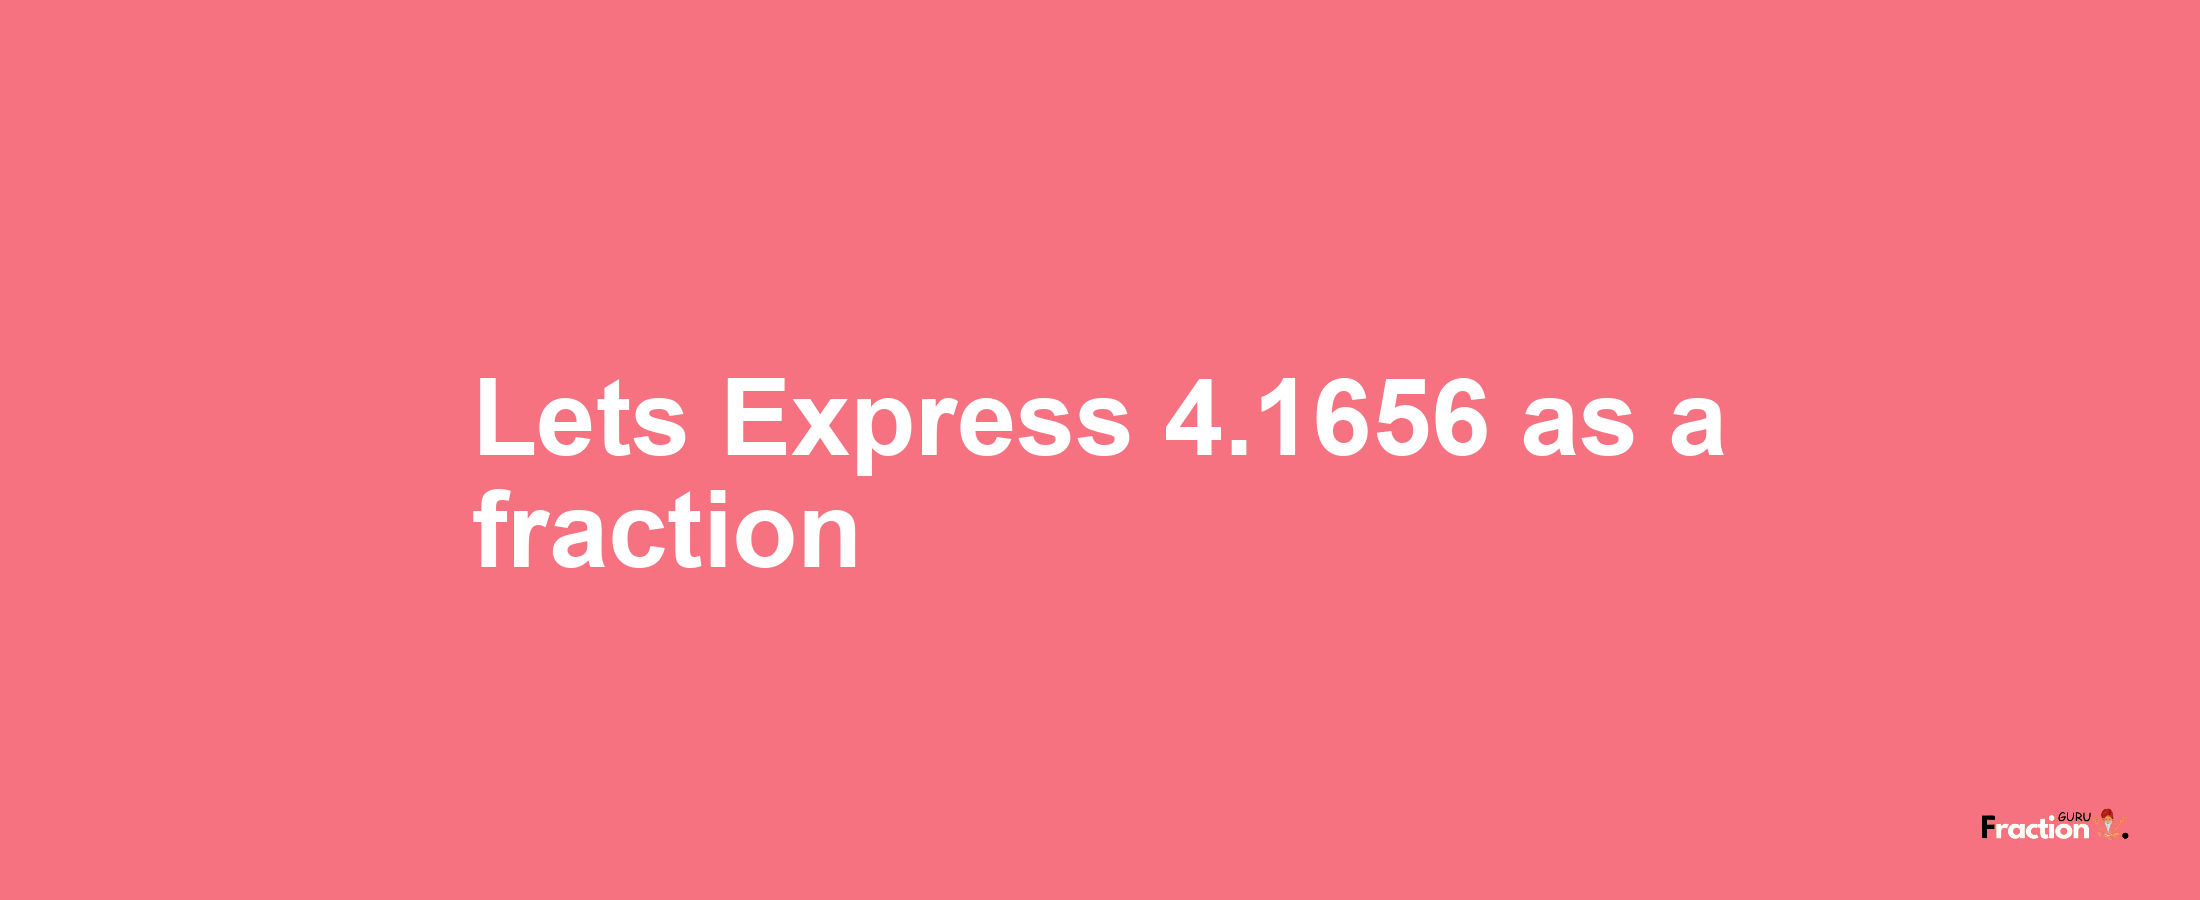 Lets Express 4.1656 as afraction